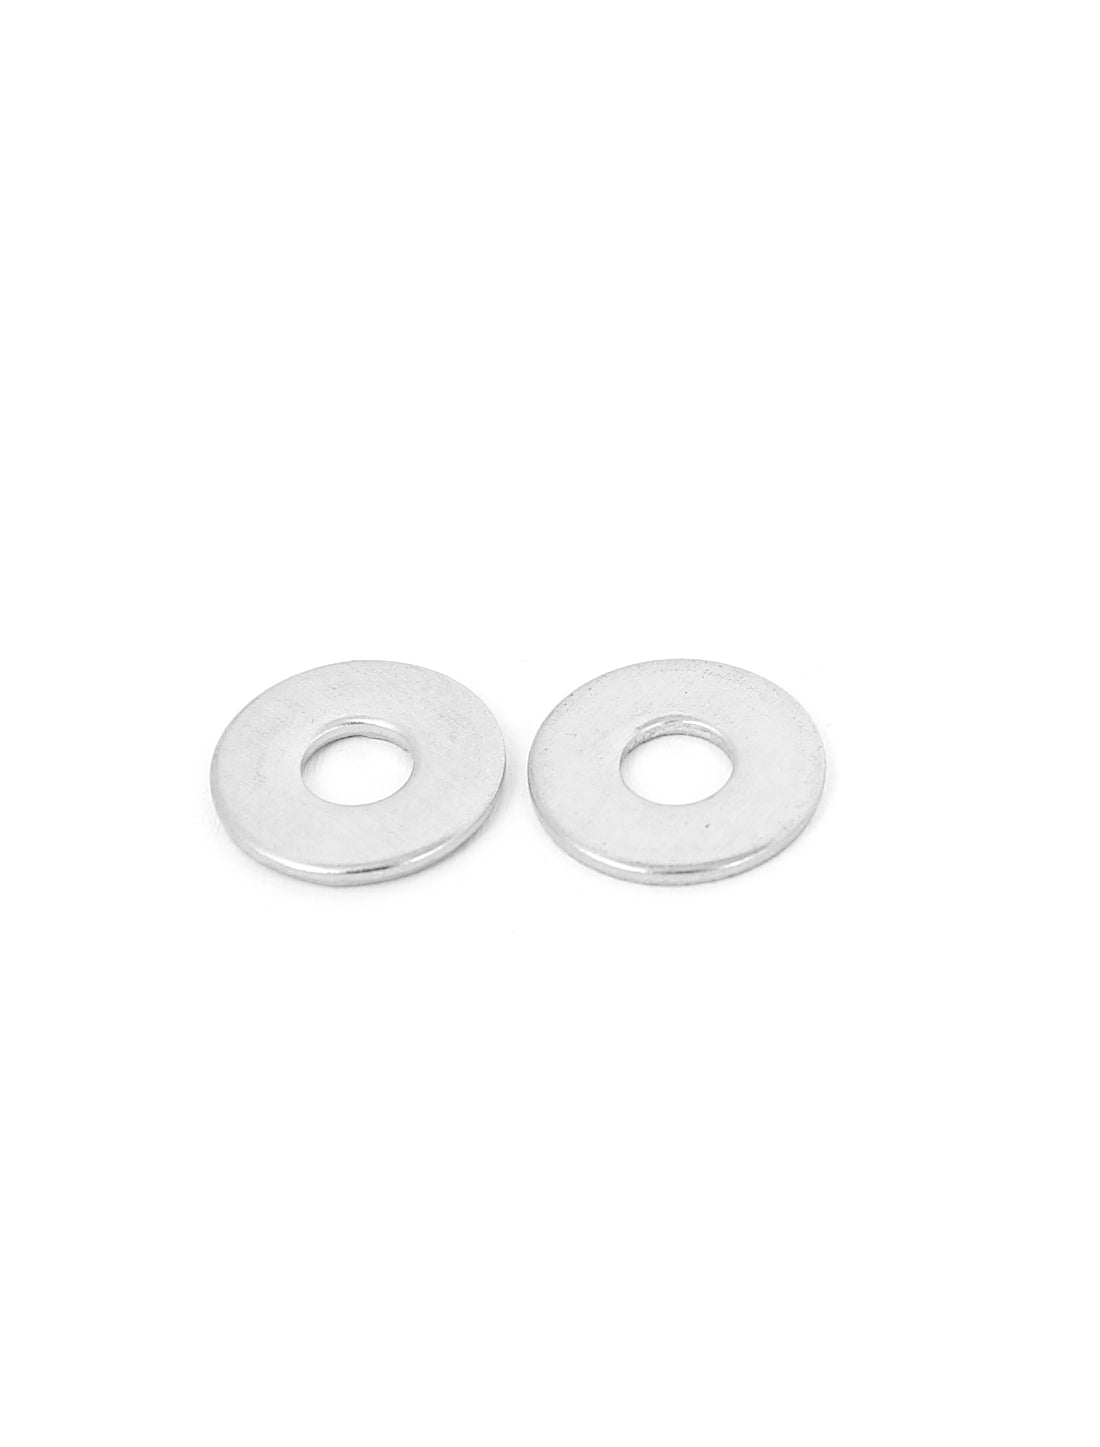 uxcell Uxcell 100Pcs M4x12mmx1mm Stainless Steel Metric Round Flat Washer for Bolt Screw